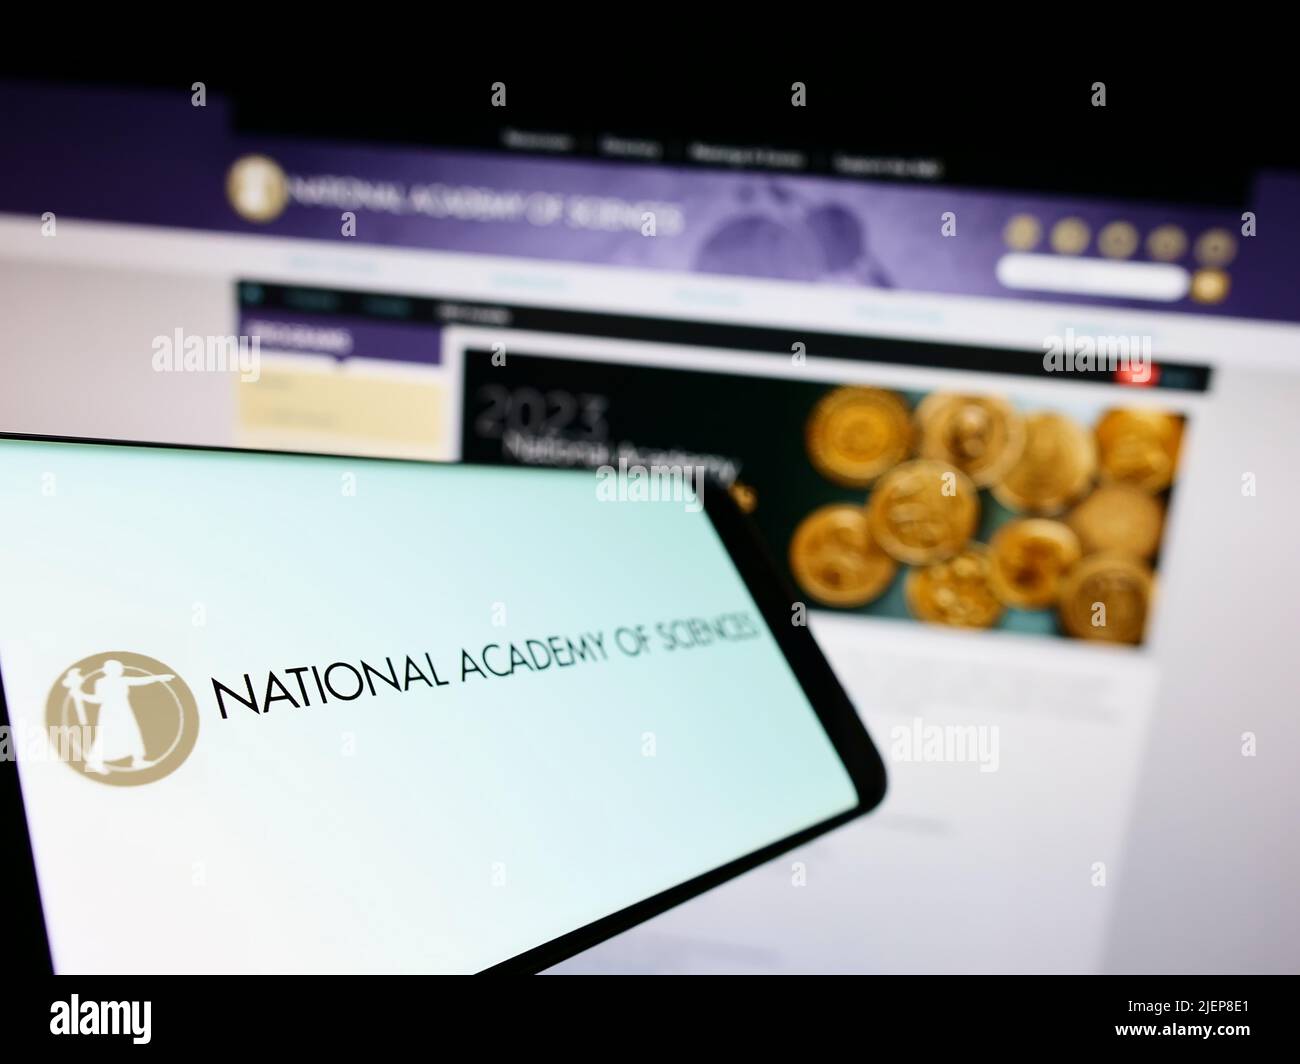 Mobile phone with logo of National Academy of Sciences (NAS) on screen in front of website. Focus on left of phone display. Stock Photo